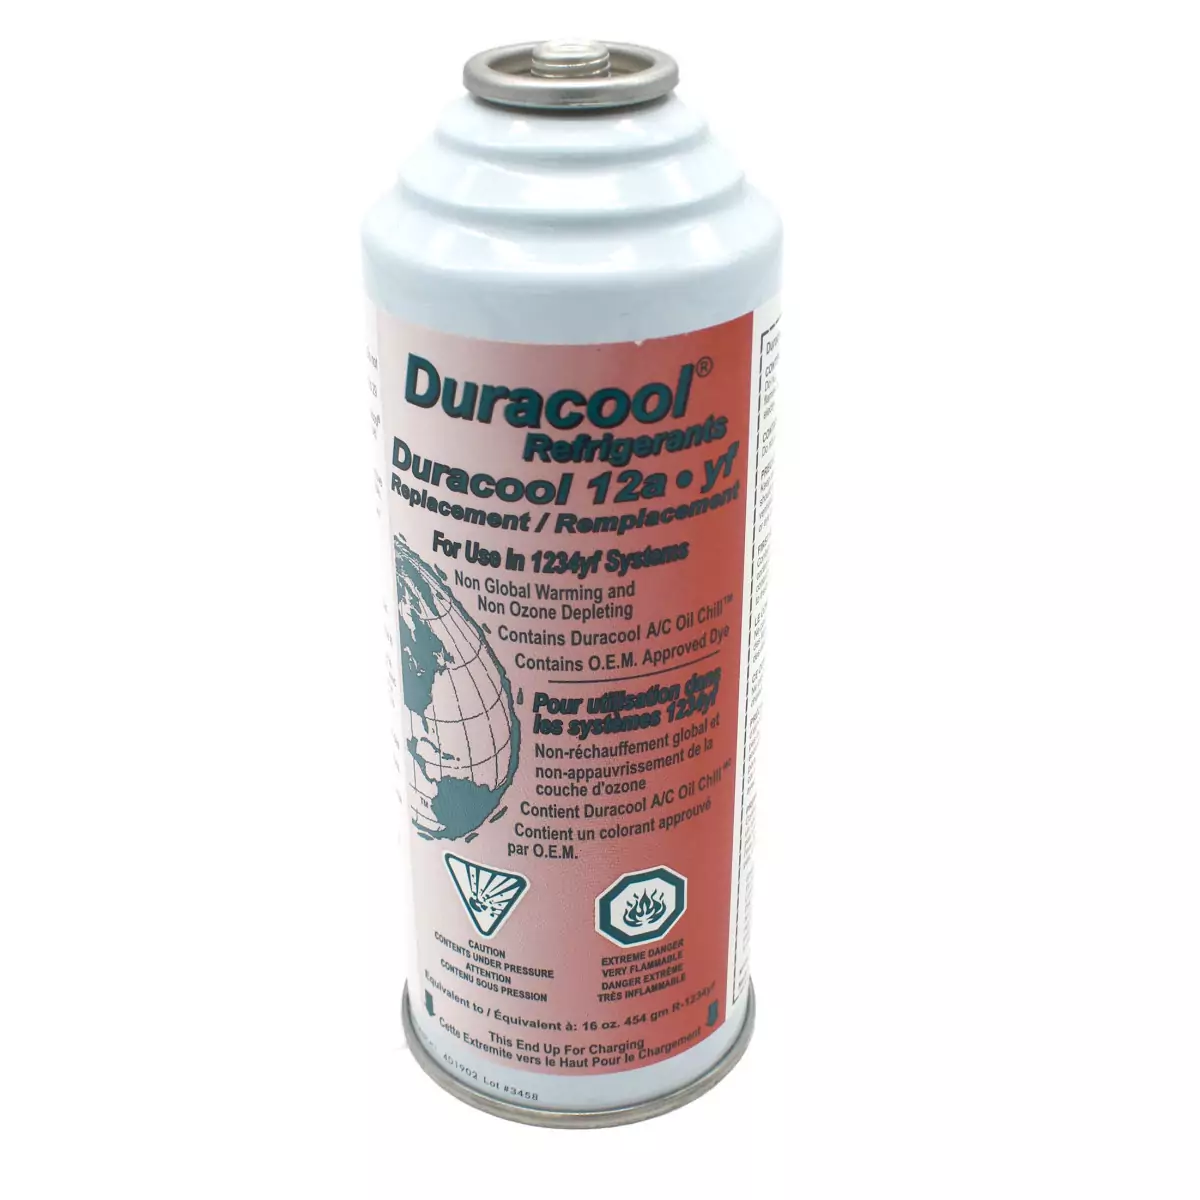 Duracool 12a-yf can, replaces HFO 1234yf refrigerant